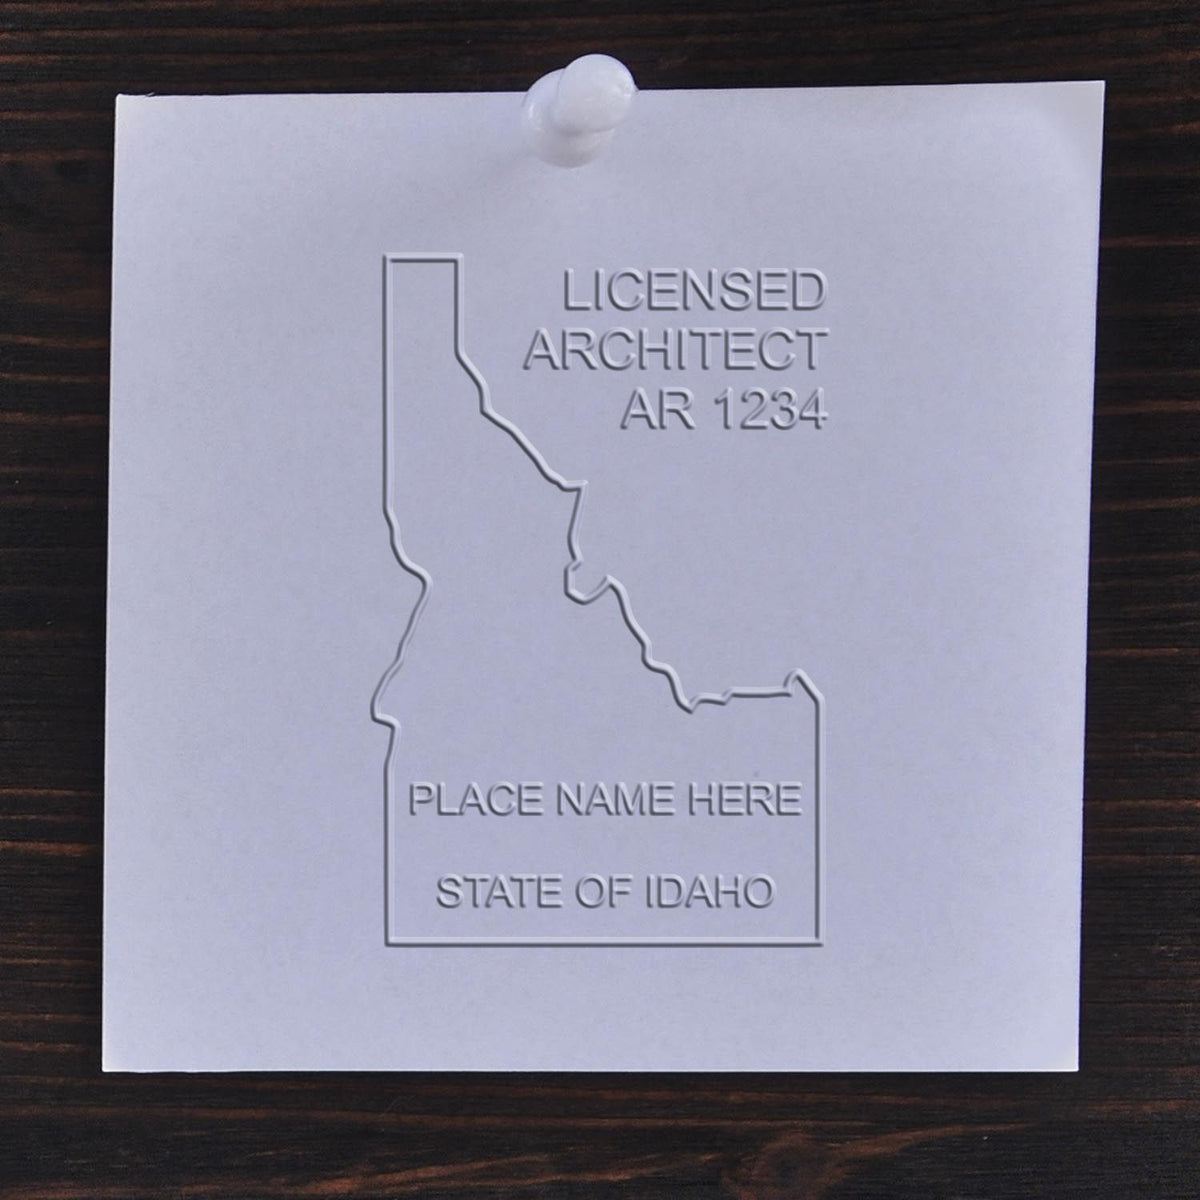 A stamped imprint of the Gift Idaho Architect Seal in this stylish lifestyle photo, setting the tone for a unique and personalized product.